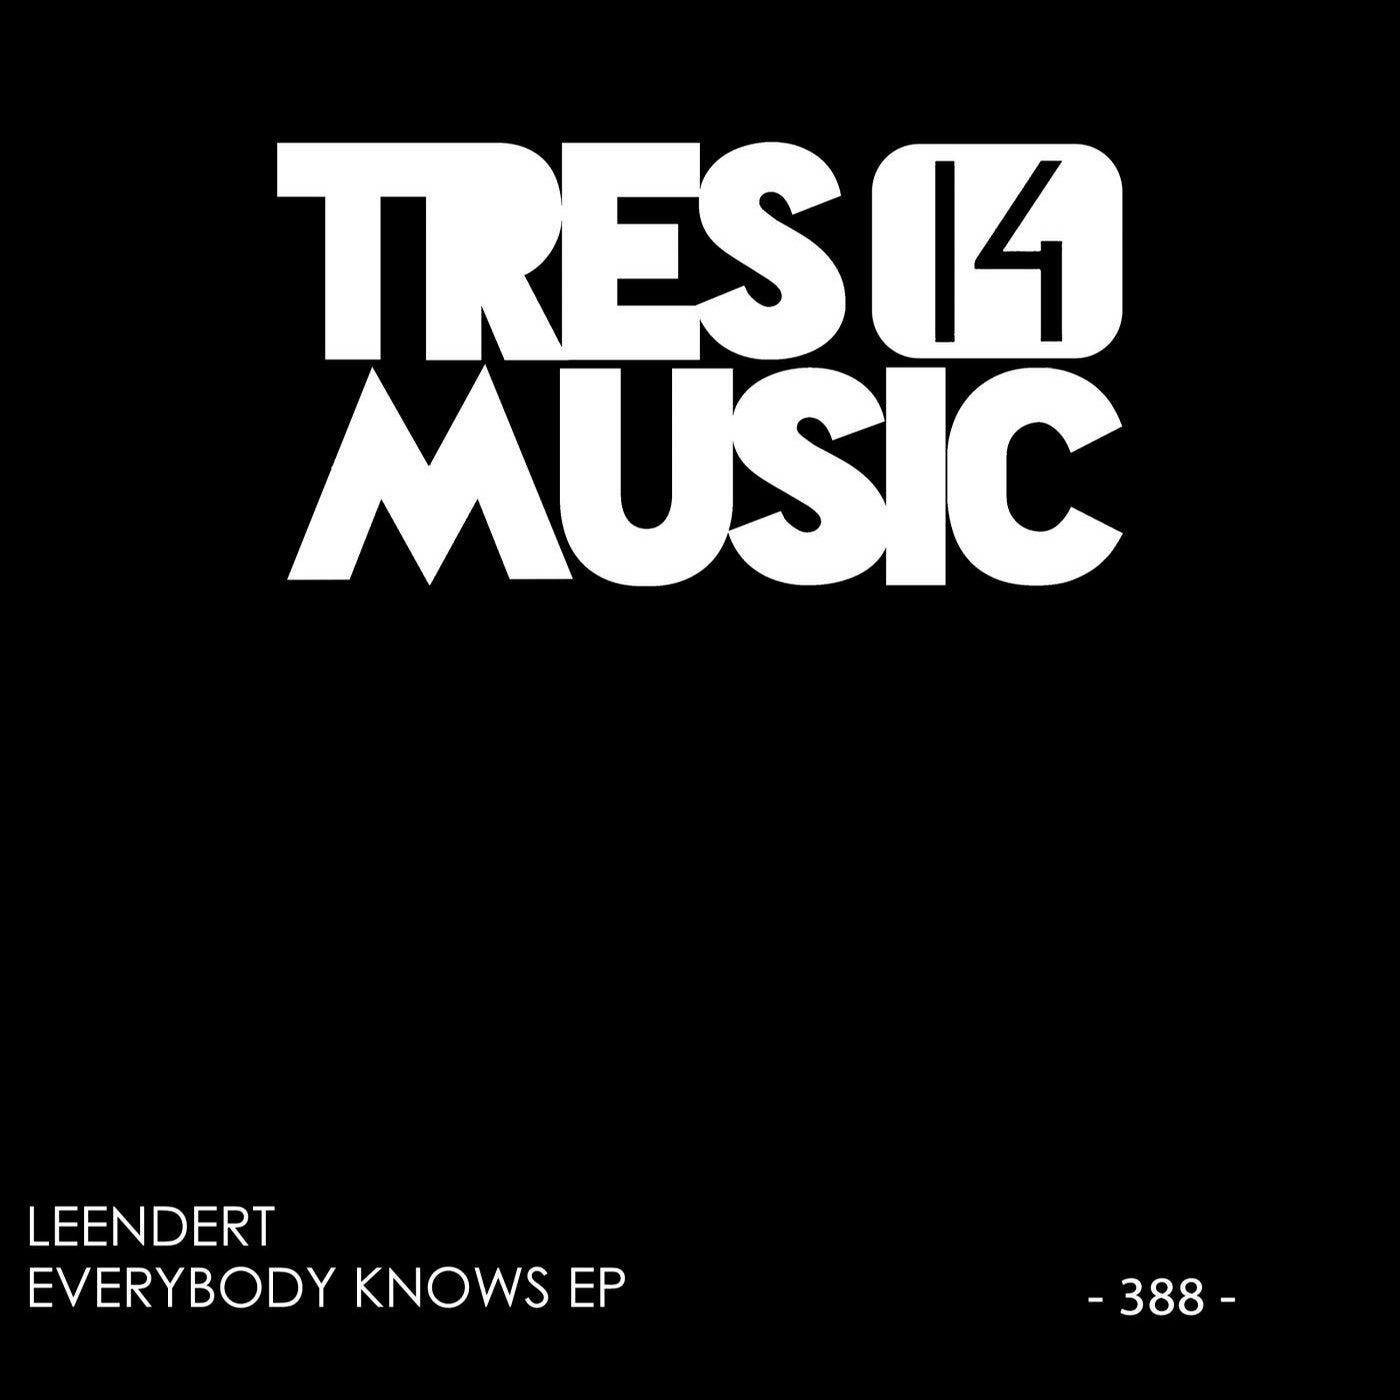 EVERYBODY KNOWS EP